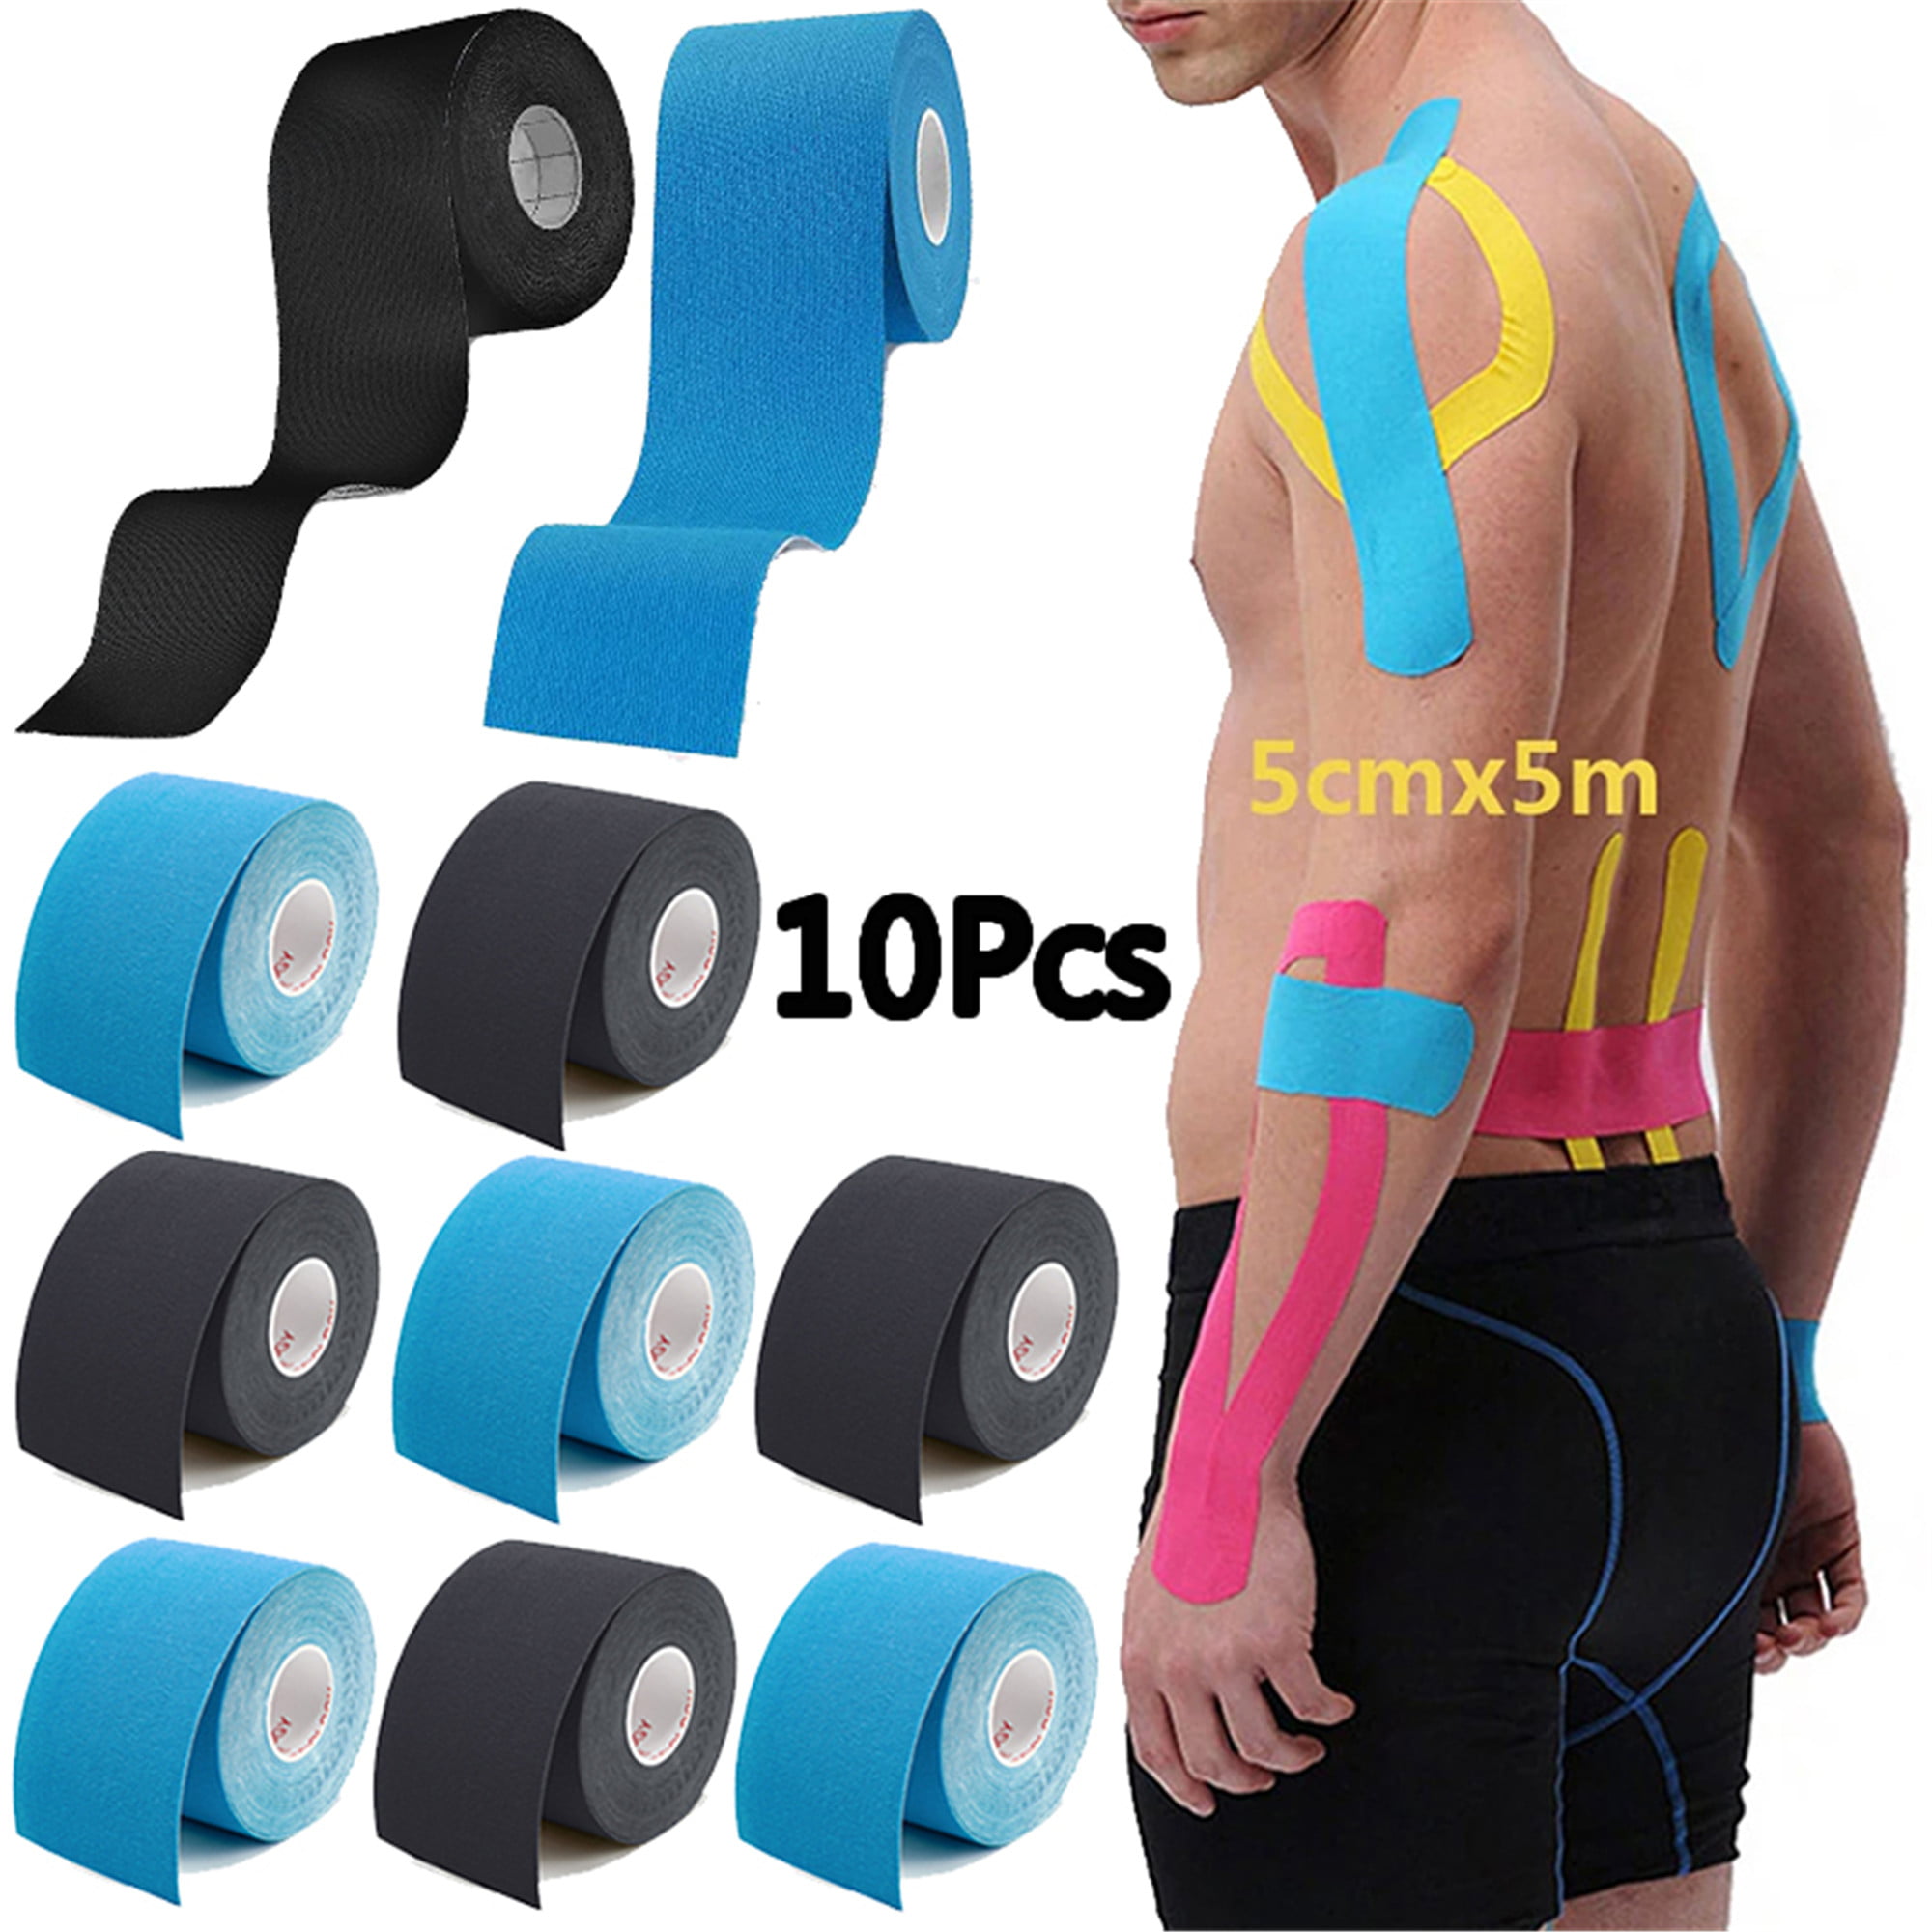 What's the Deal With the Tape? Kinesiology Therapeutic (KT) Tape Benefits -  Spooner Physical Therapy